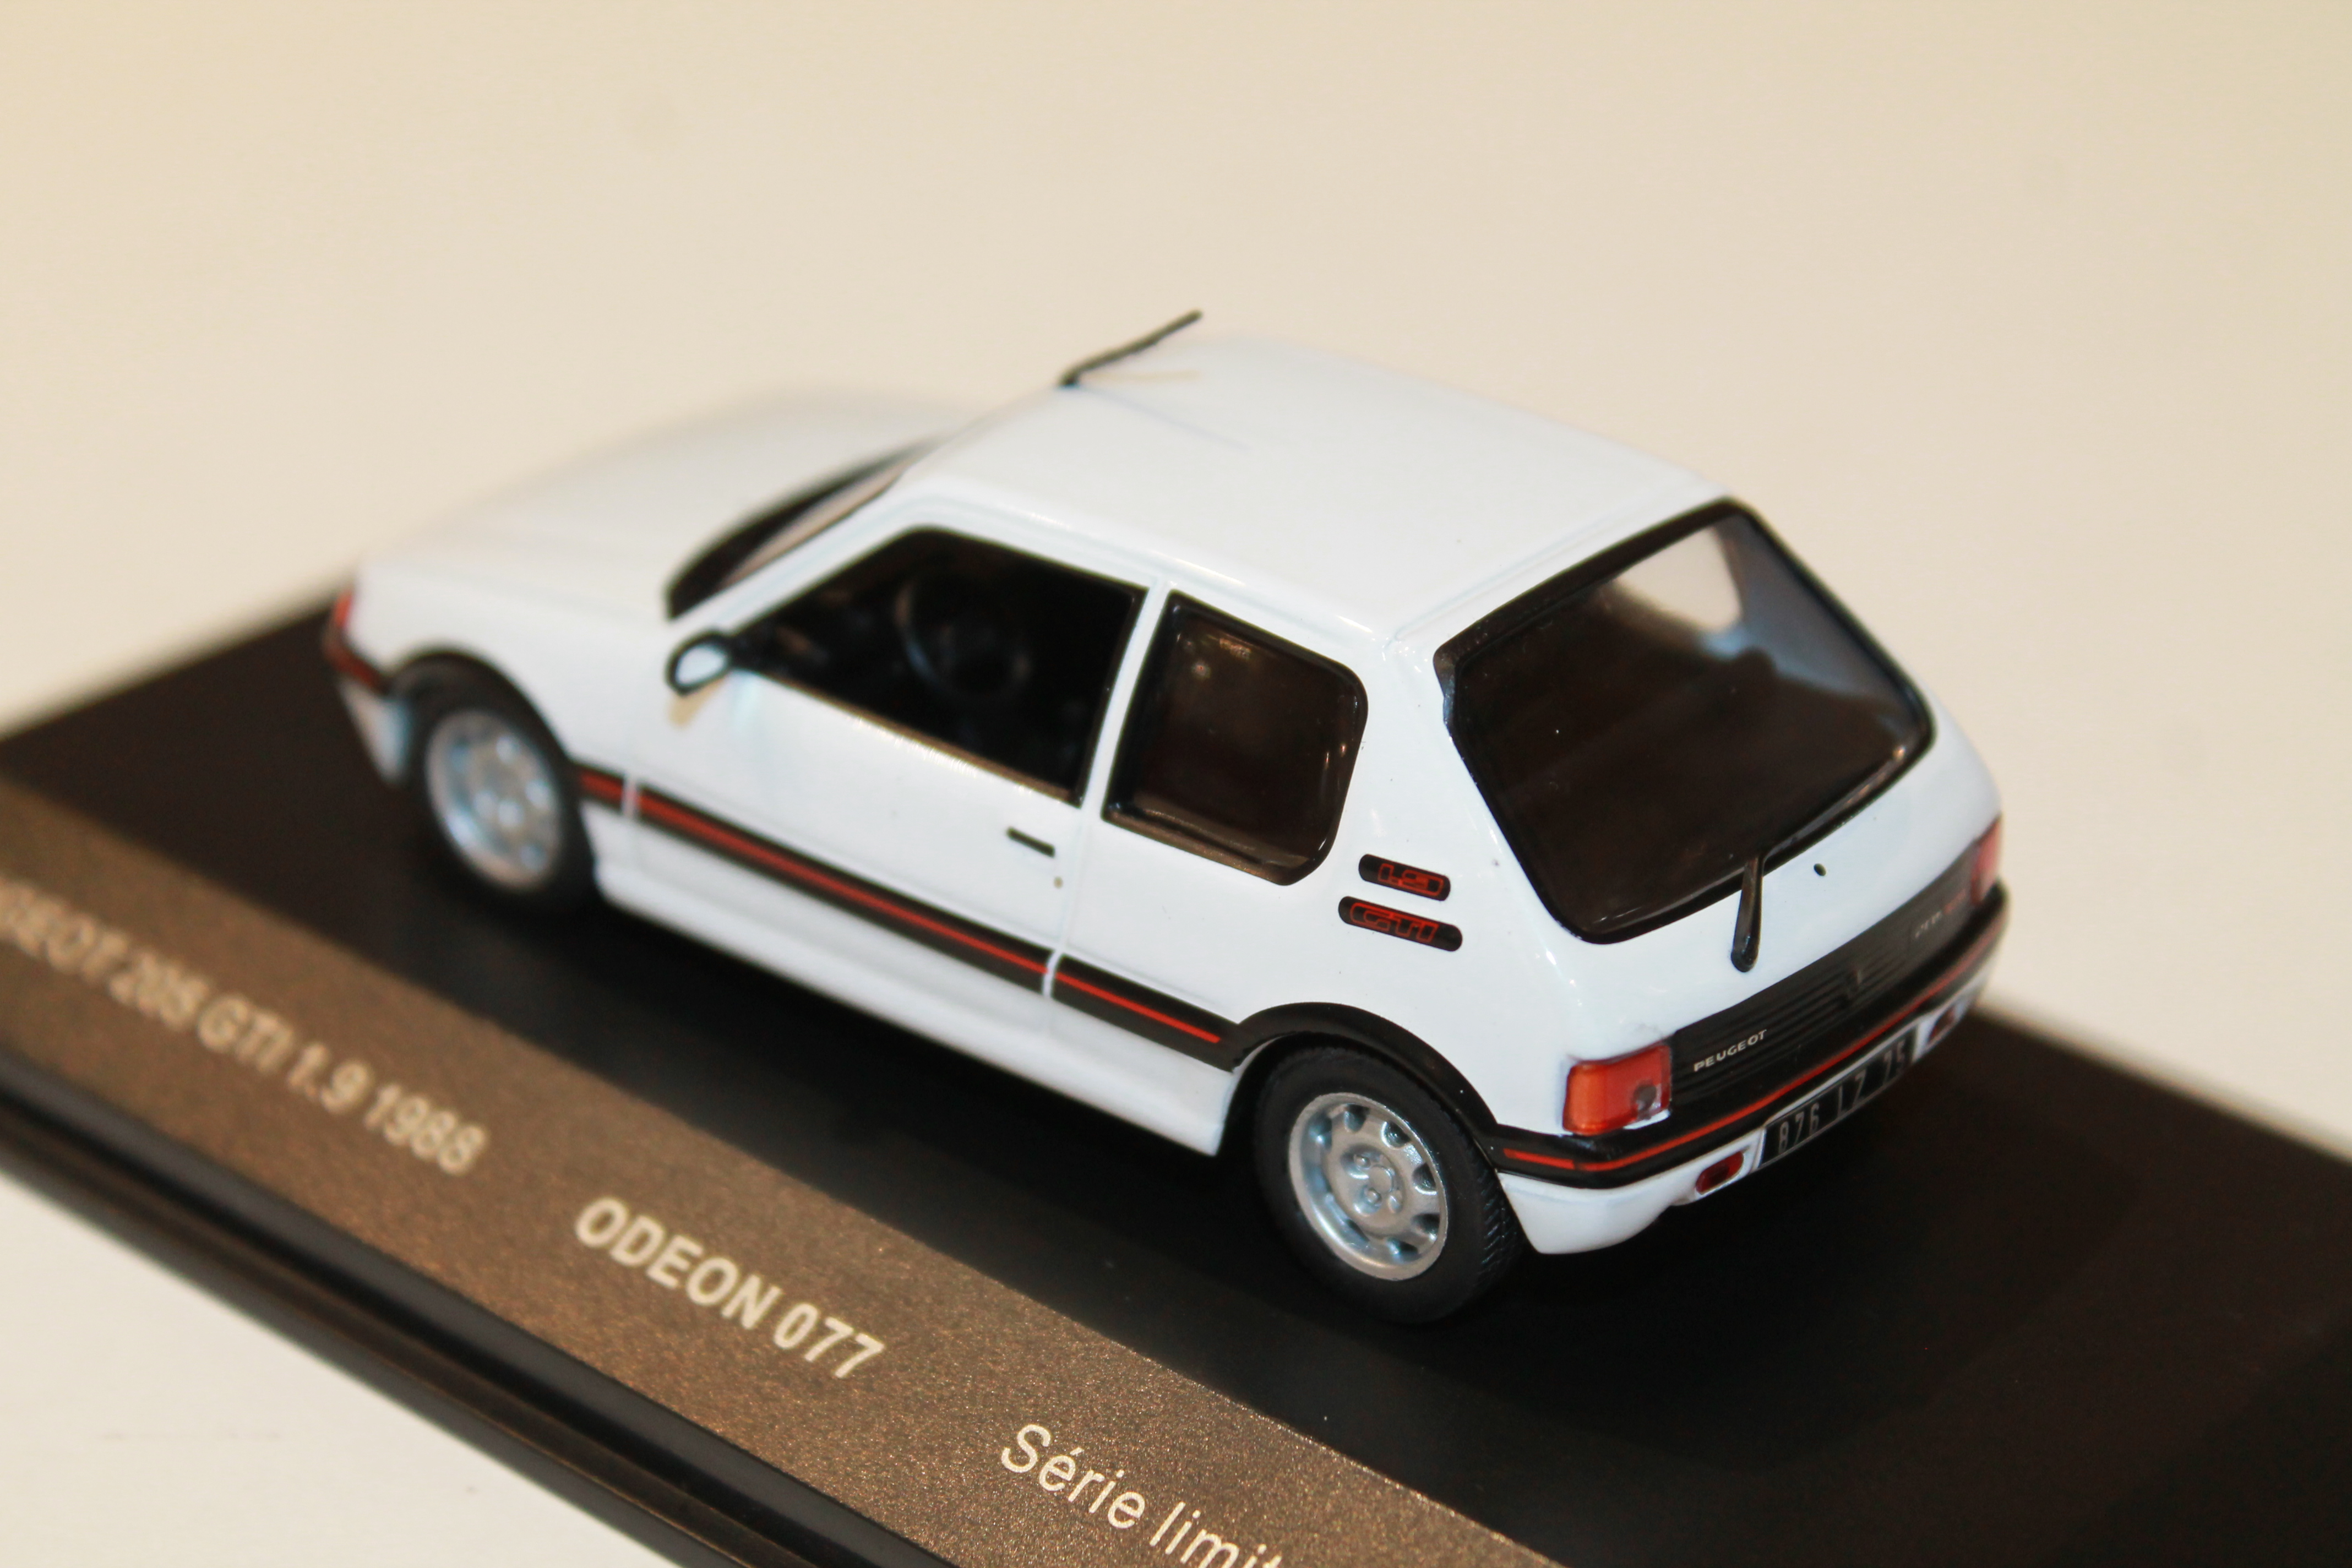 Miniature Odeon 078 Peugeot 205 Gti 1.9 1988 Youngtimer 1/43 IN Box Red